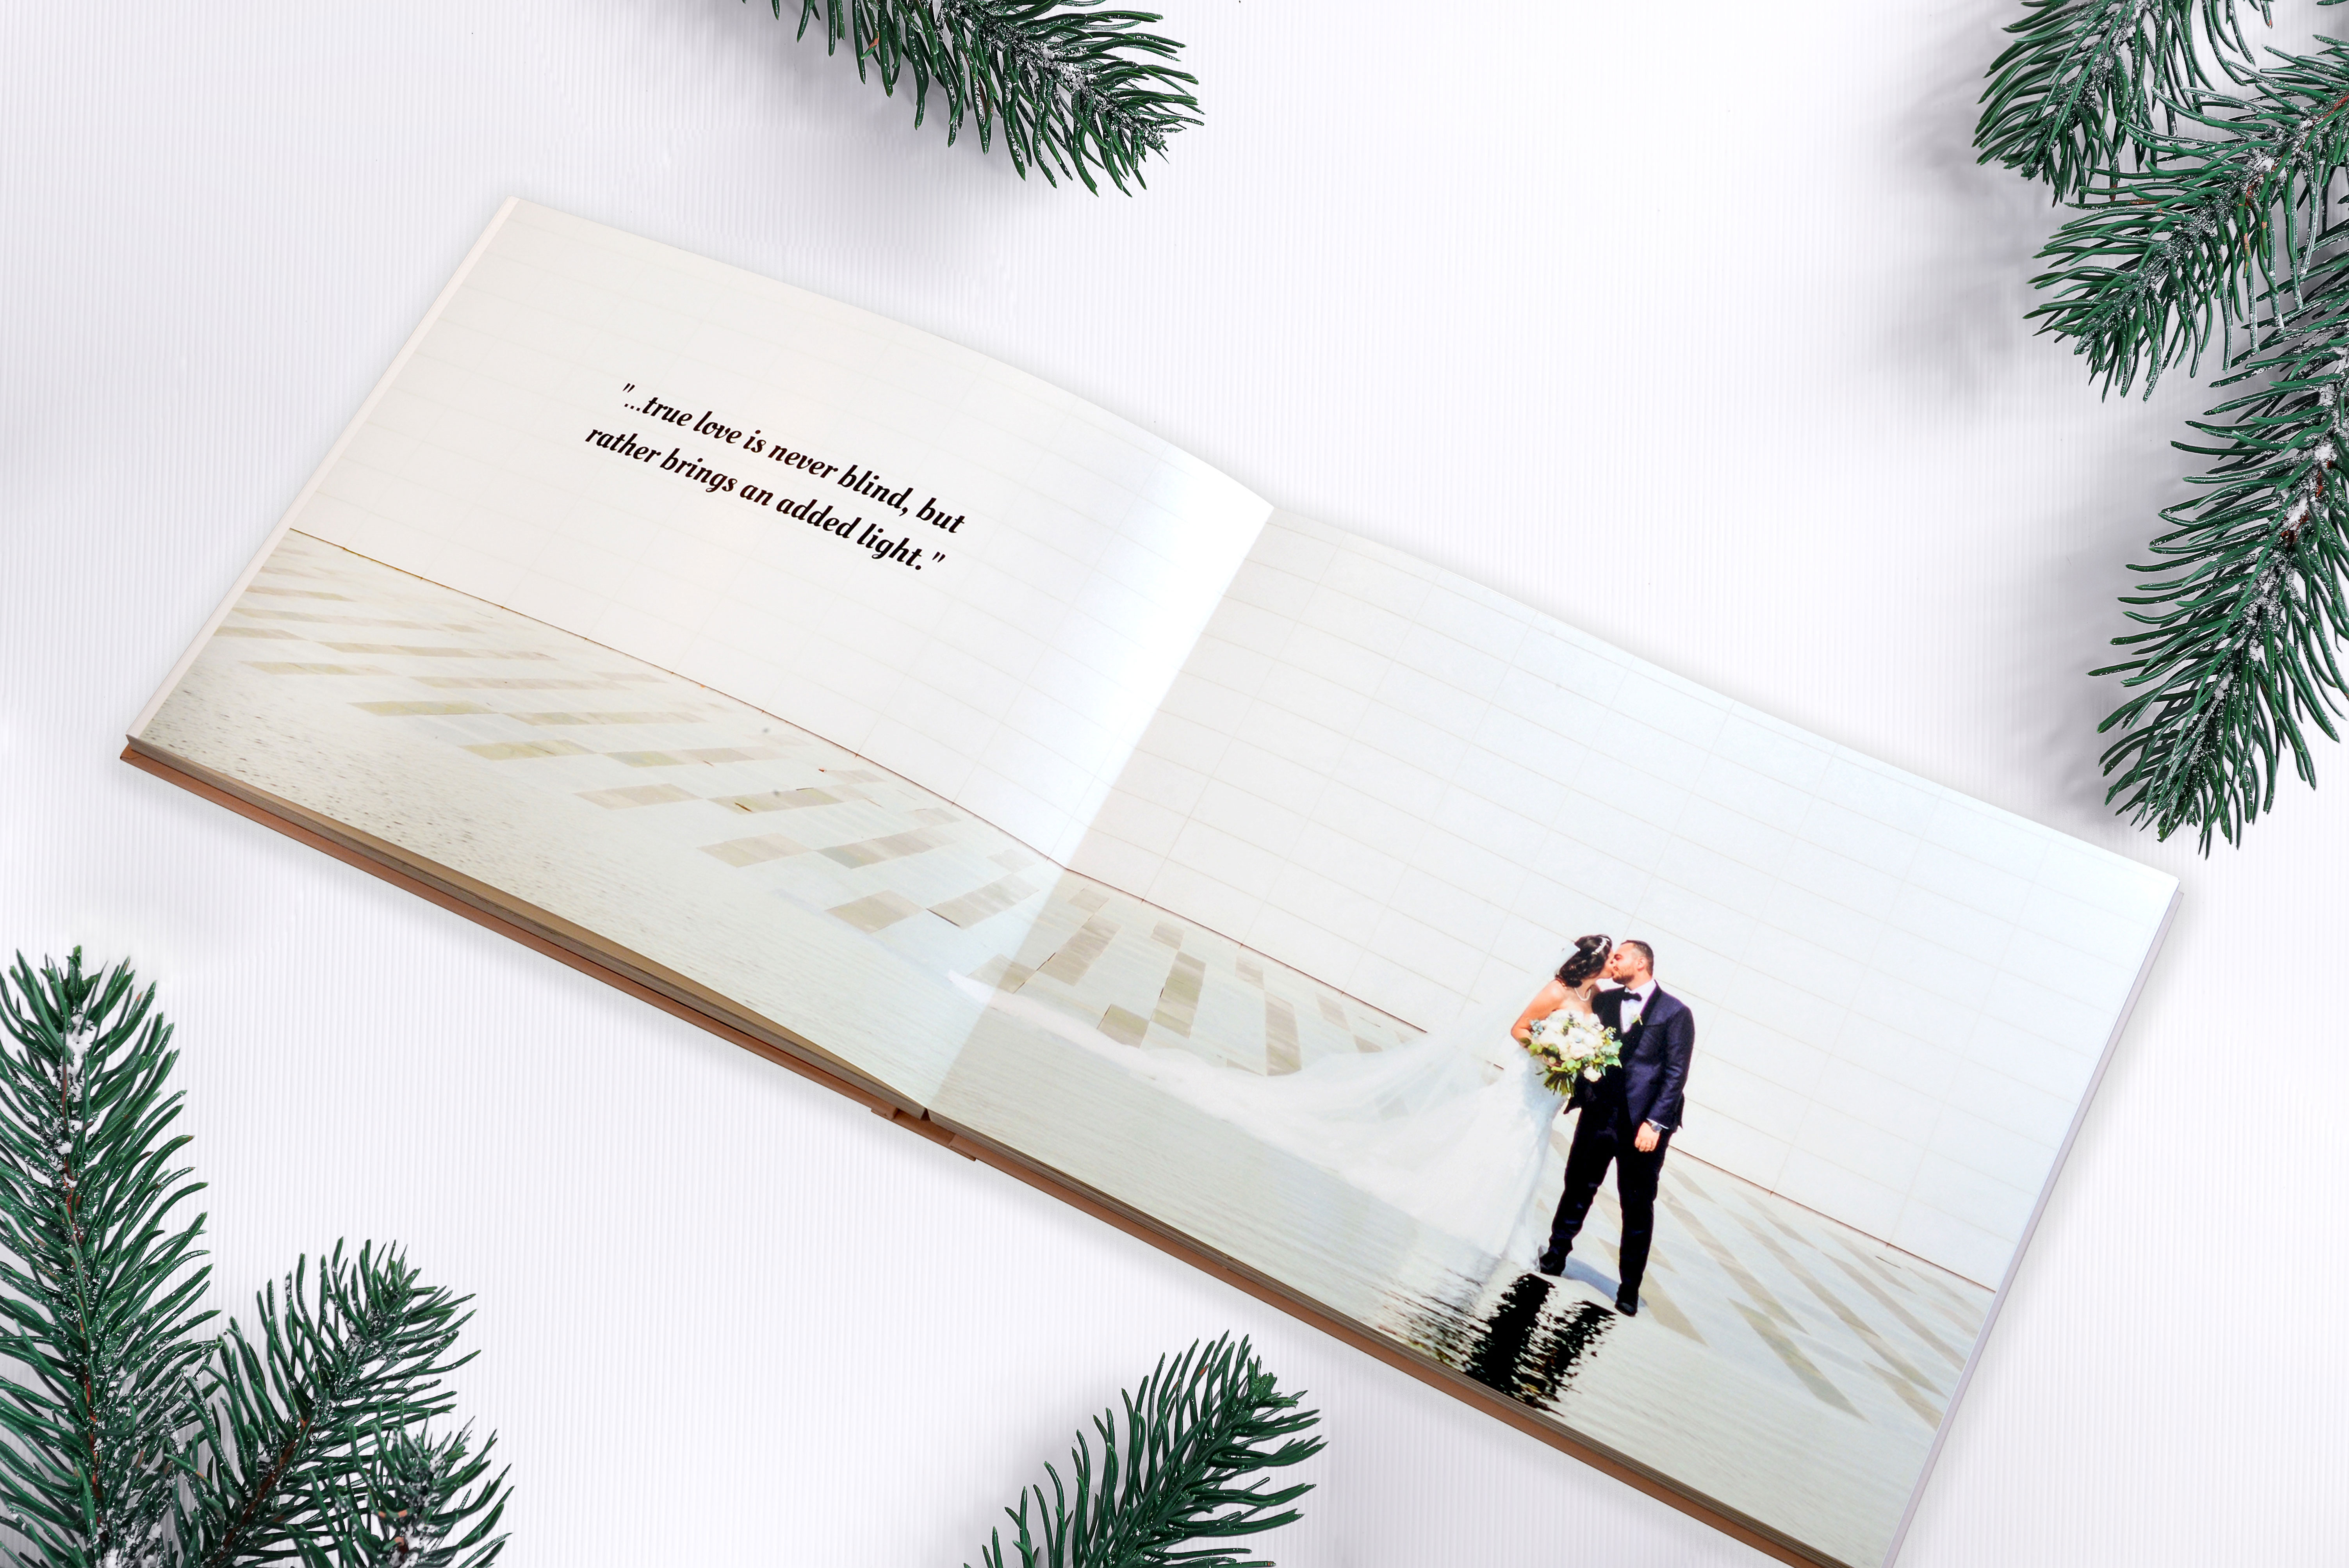 Layflat photo book showing a married couple on their wedding day